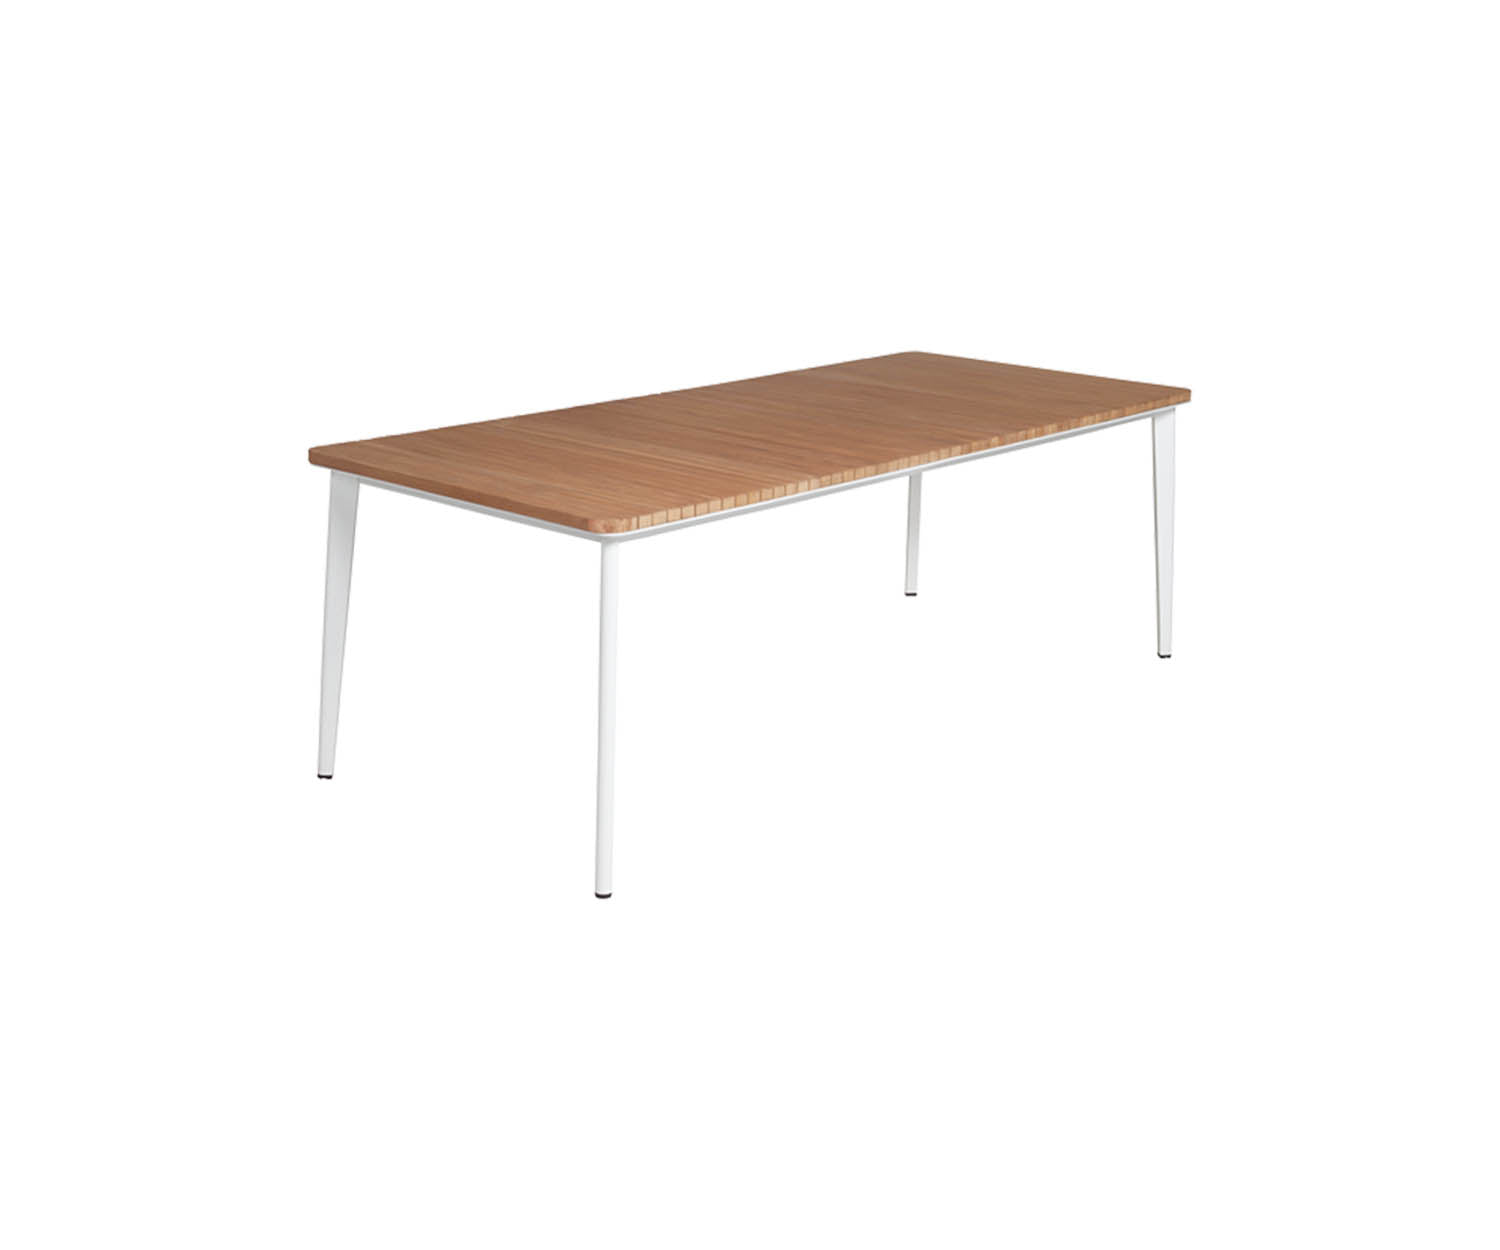 Triconfort, Riba 40718 Dining Table